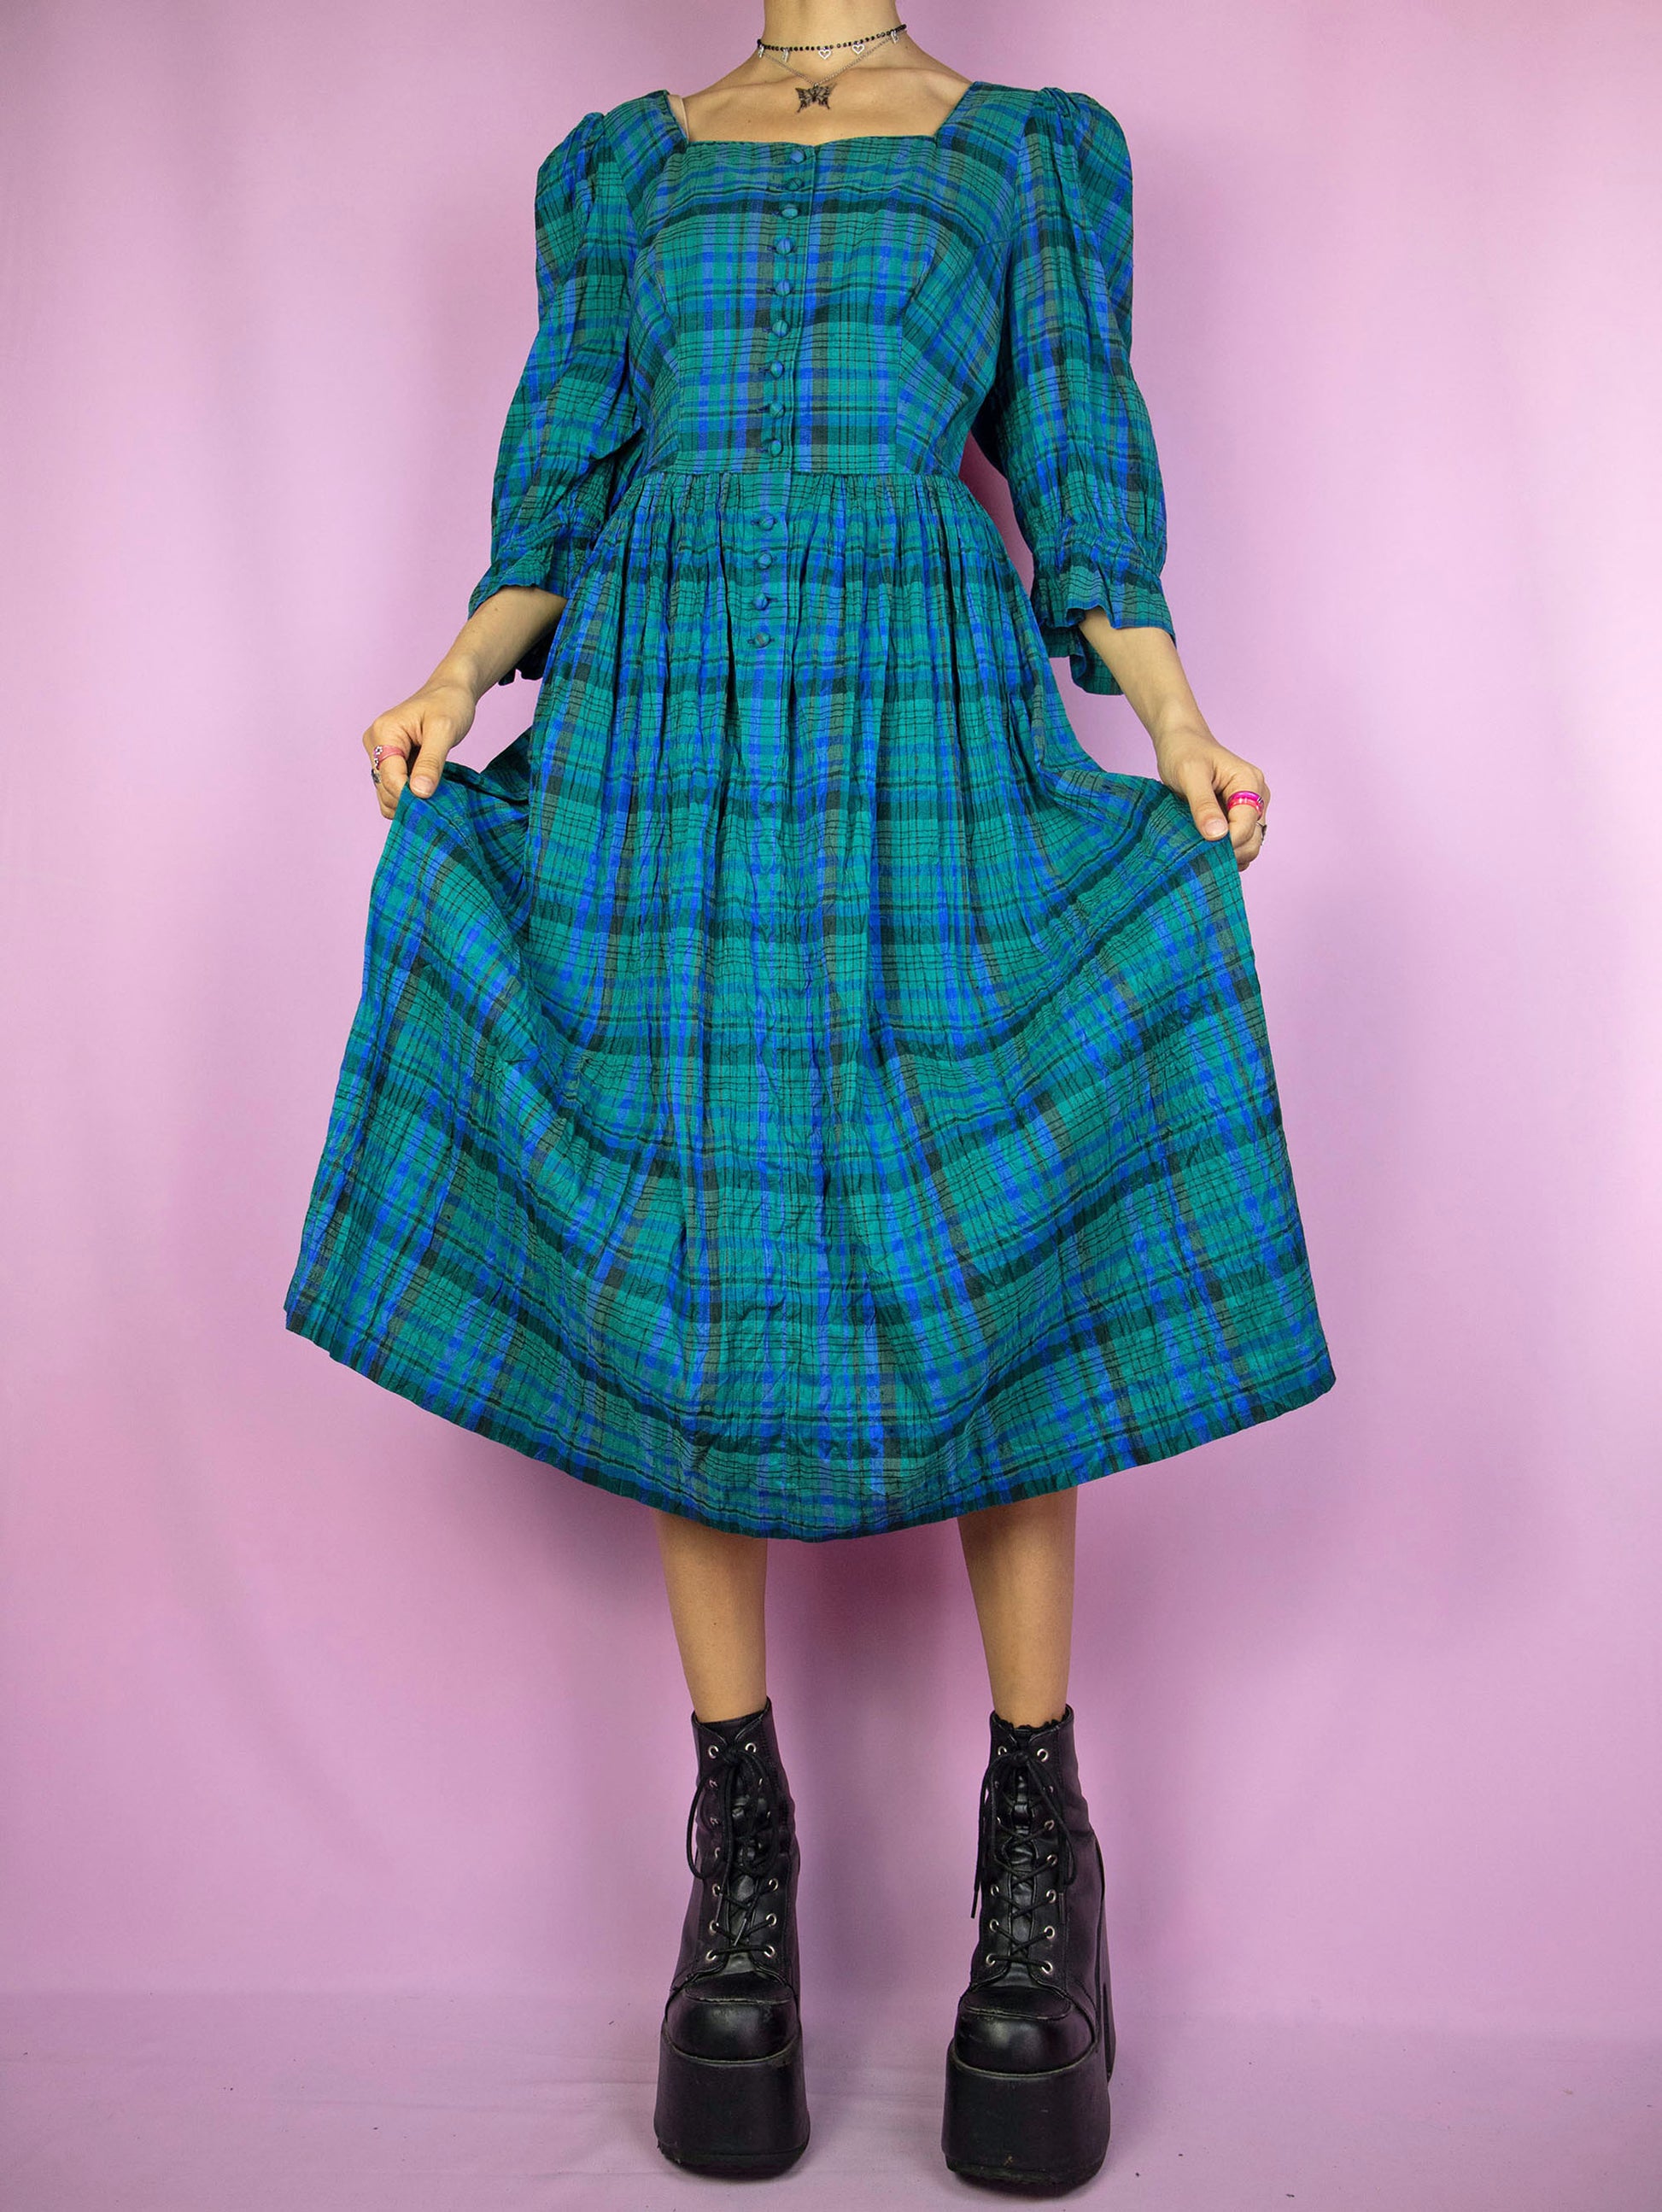 The Vintage 80s Cottage Plaid Midi Dress is a pleated blue and green check dress with puff sleeves and buttons. Boho country western 1980s prairie midi dress.